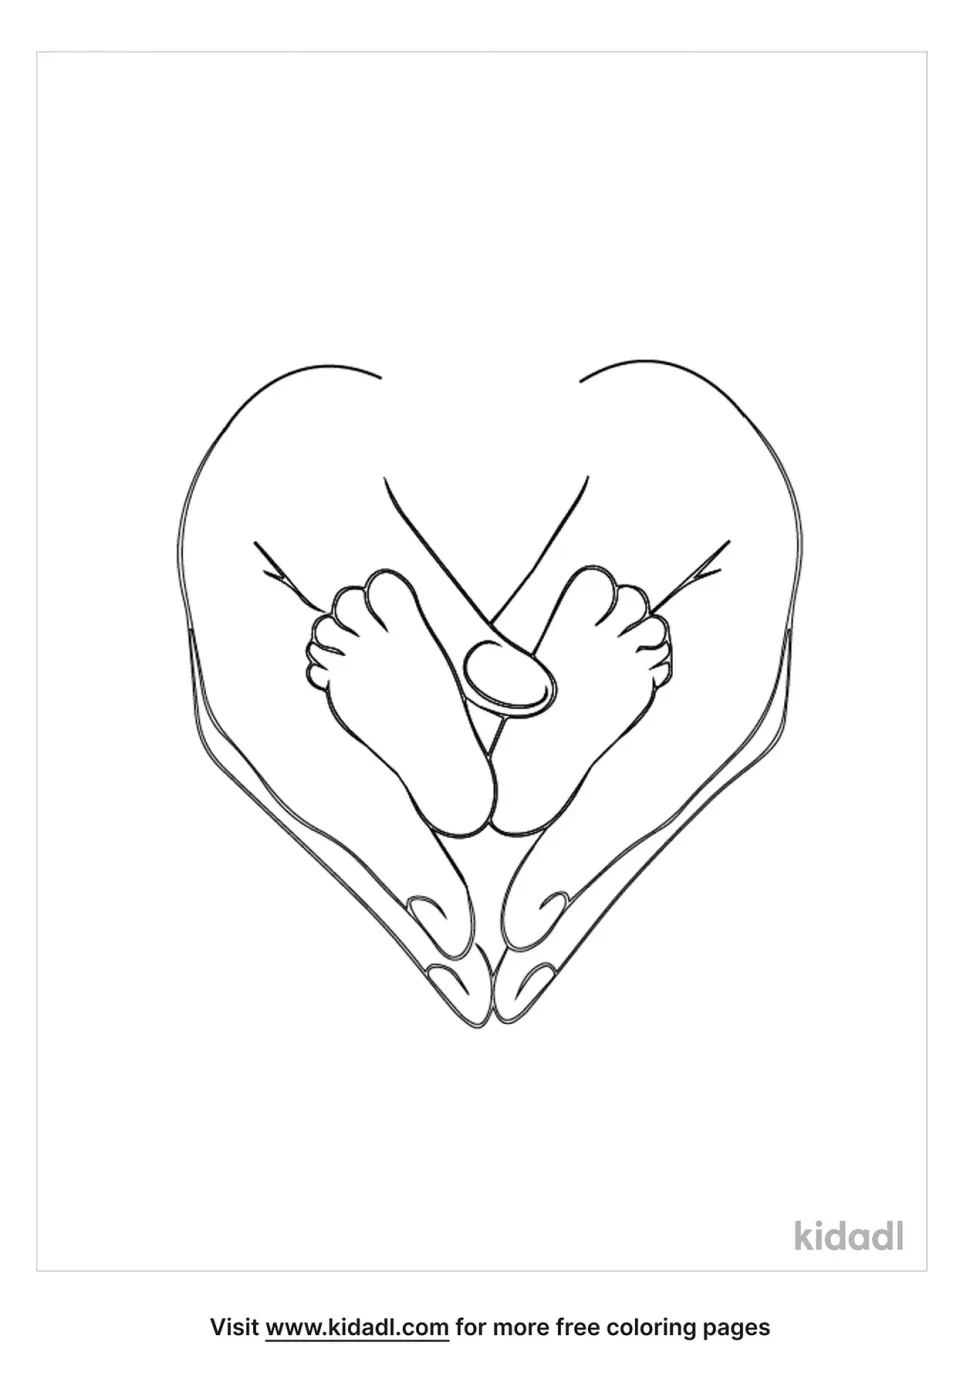 Holding Baby's Feet In A Heart